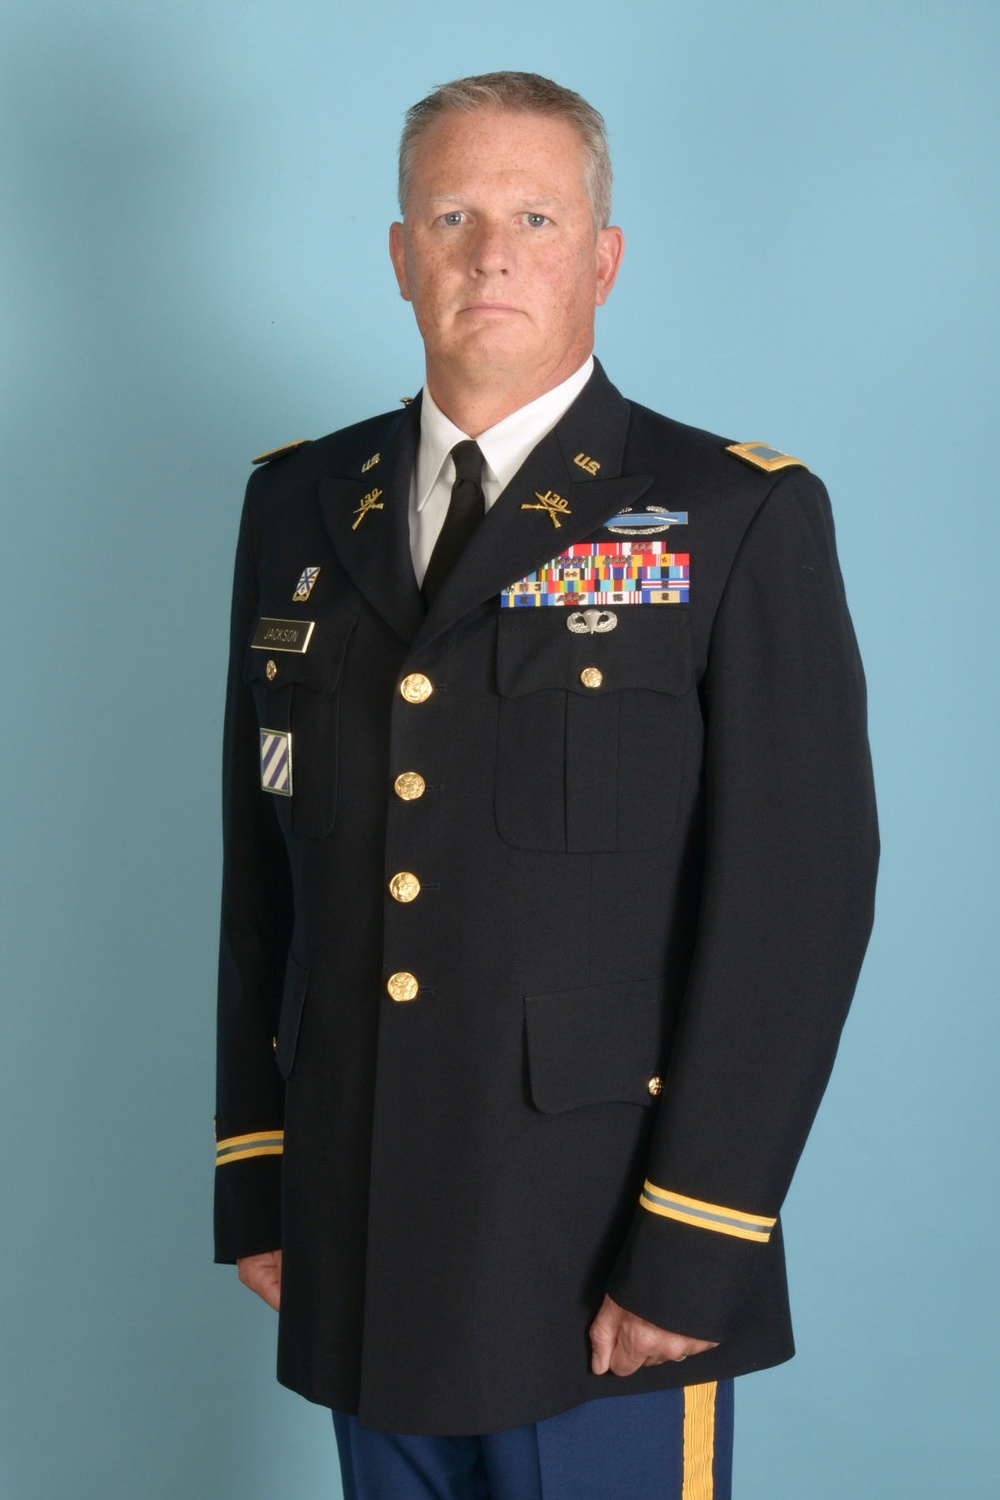 Illinois National Guard Soldier Inducted into ROTC Hall of Fame